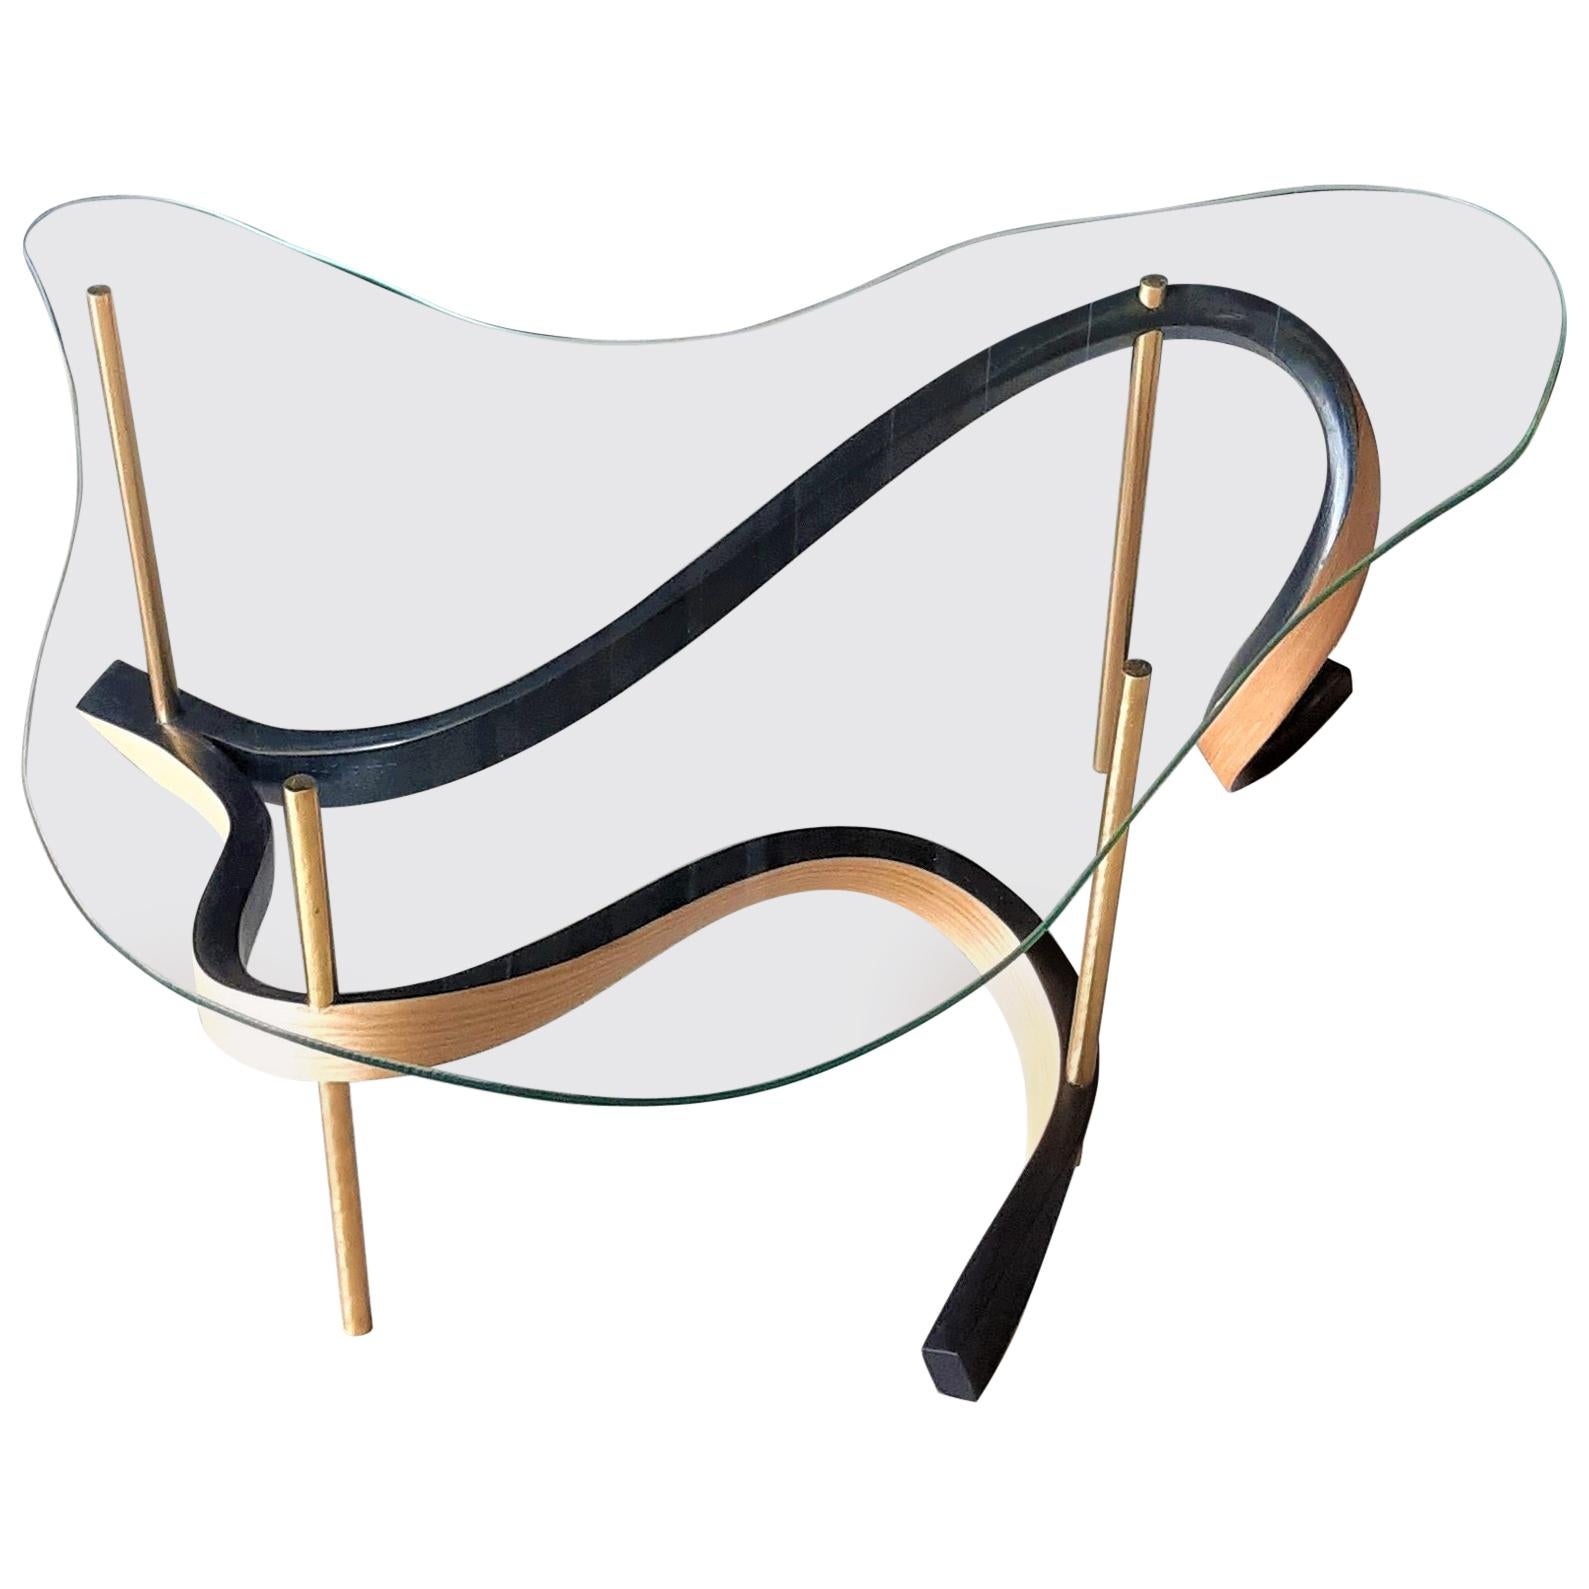 Table B4 - Vrksa Series by Raka Studio in Black and Natural Bentwood with Brass